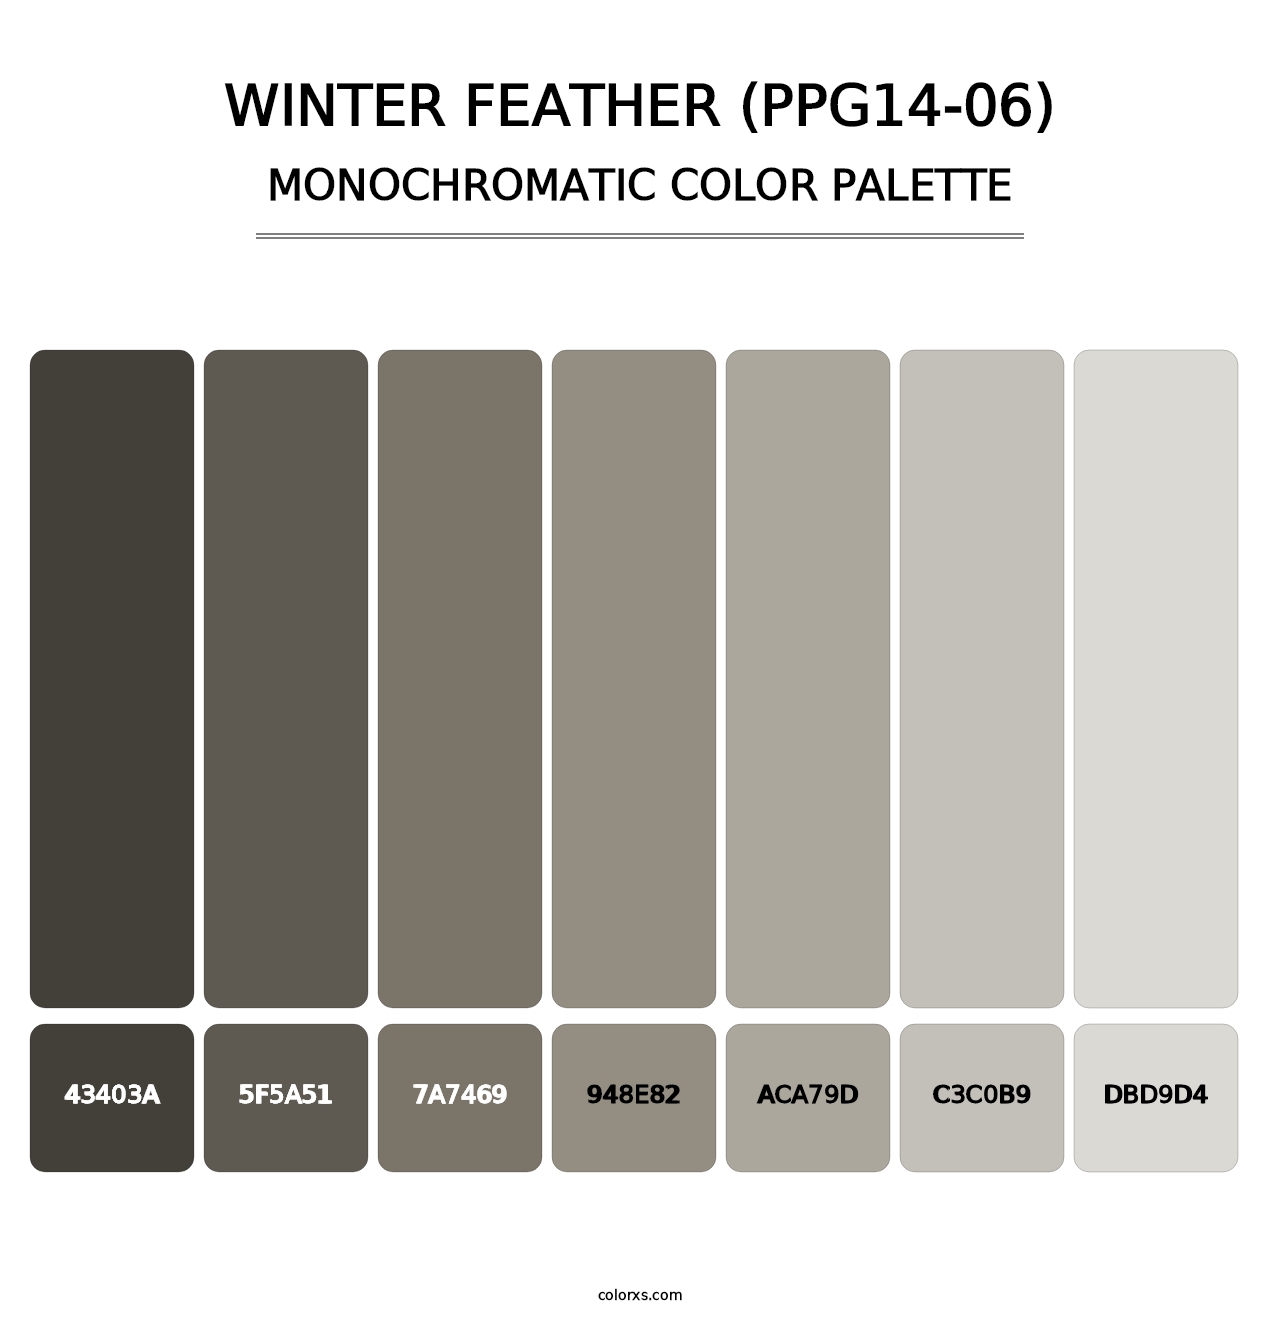 Winter Feather (PPG14-06) - Monochromatic Color Palette